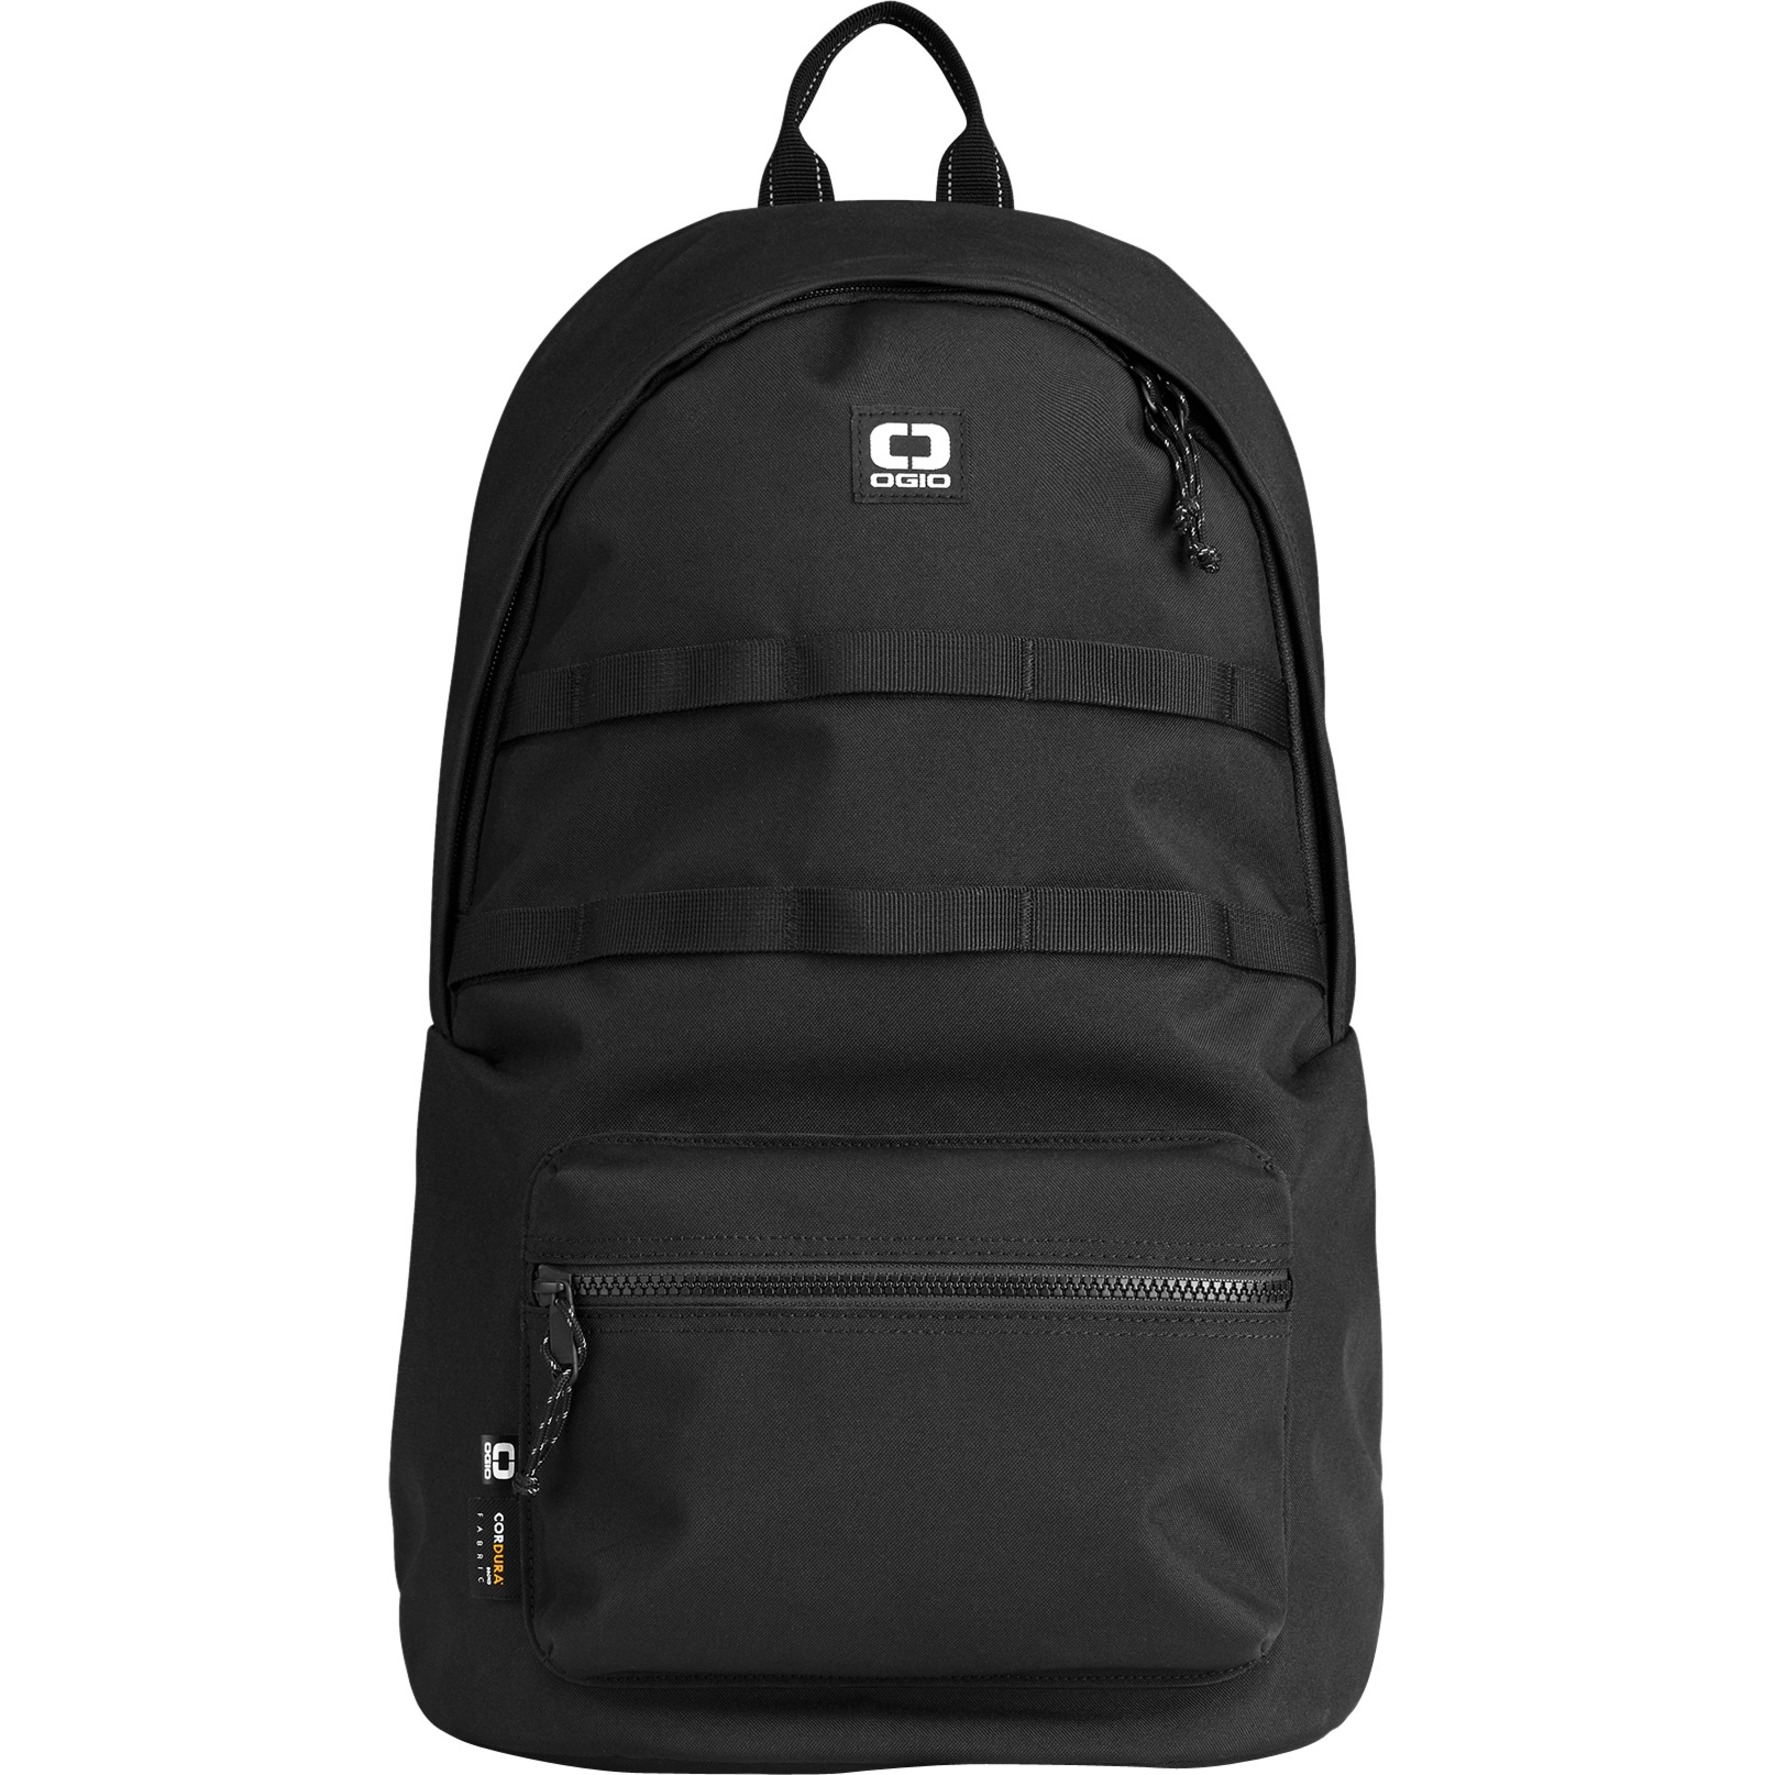 Ogio ALPHA Convoy 120 Carrying Case (Backpack) for 15" Notebook, Black - image 4 of 6